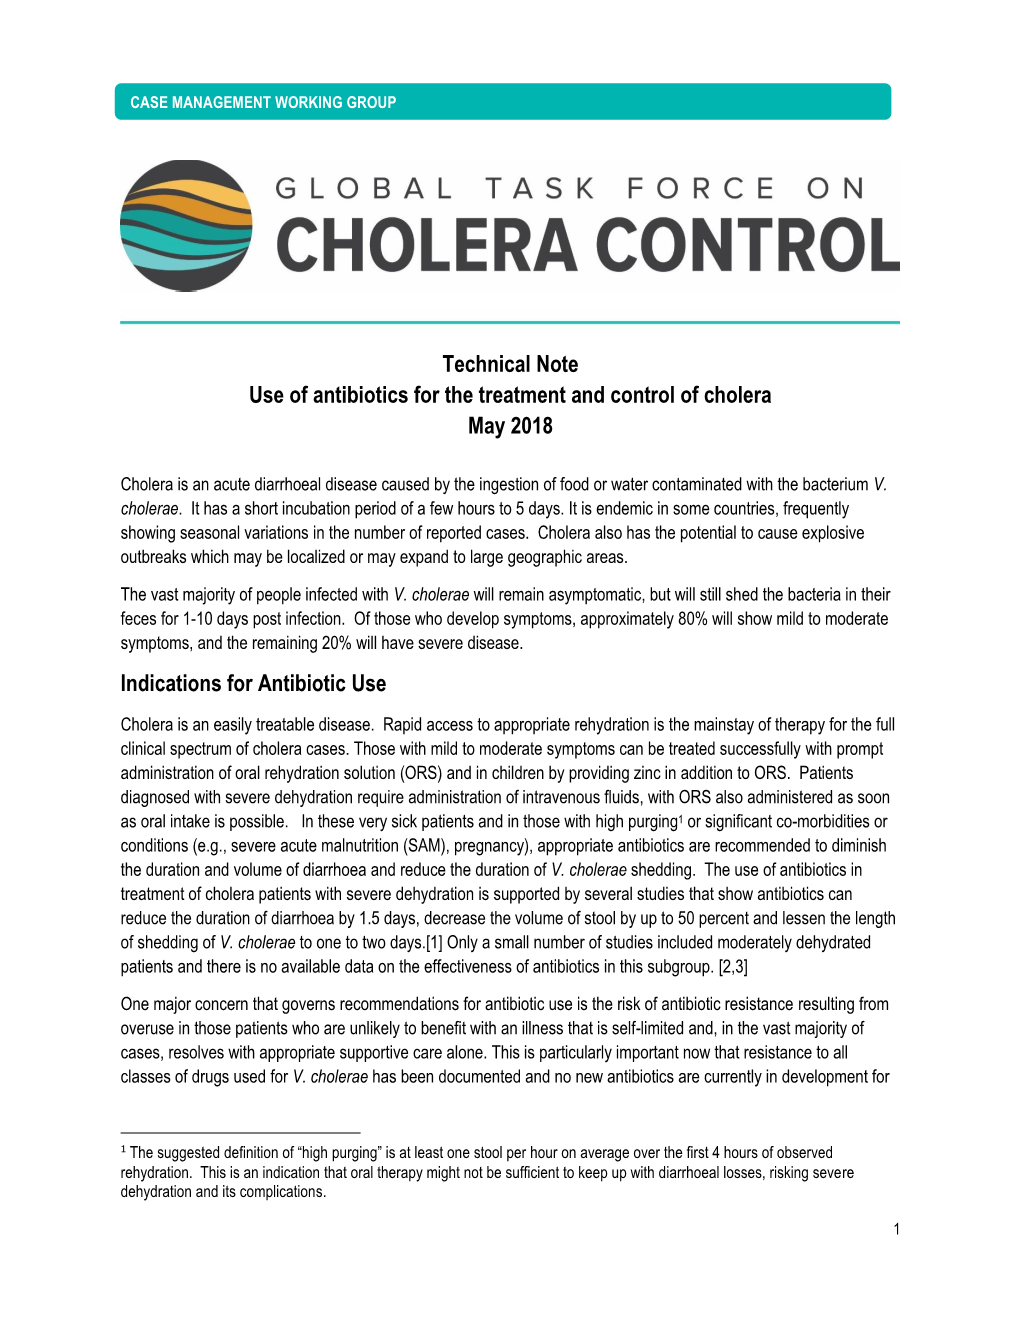 Technical Note Use of Antibiotics for the Treatment and Control of Cholera May 2018 Indications for Antibiotic